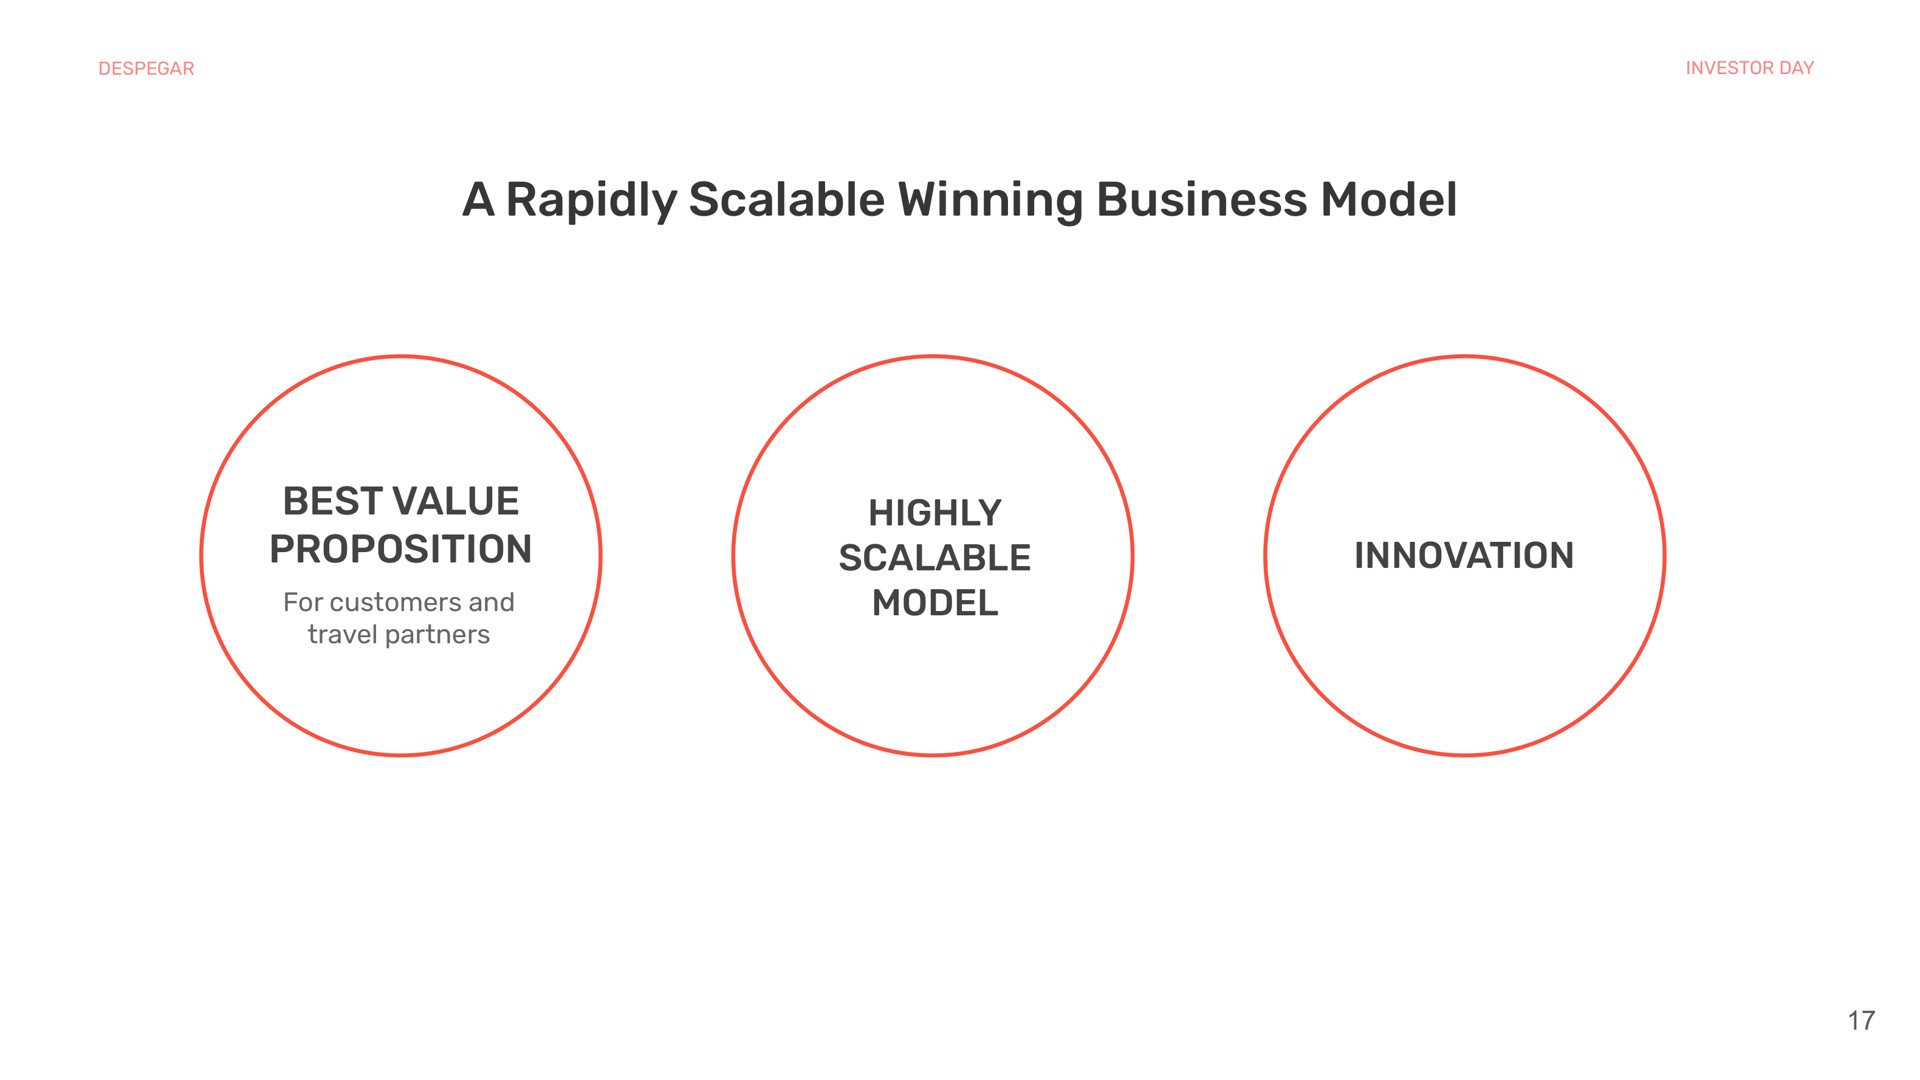 a rapidly scalable winning business model best value proposition for customers and travel partners highly scalable model innovation | Despegar